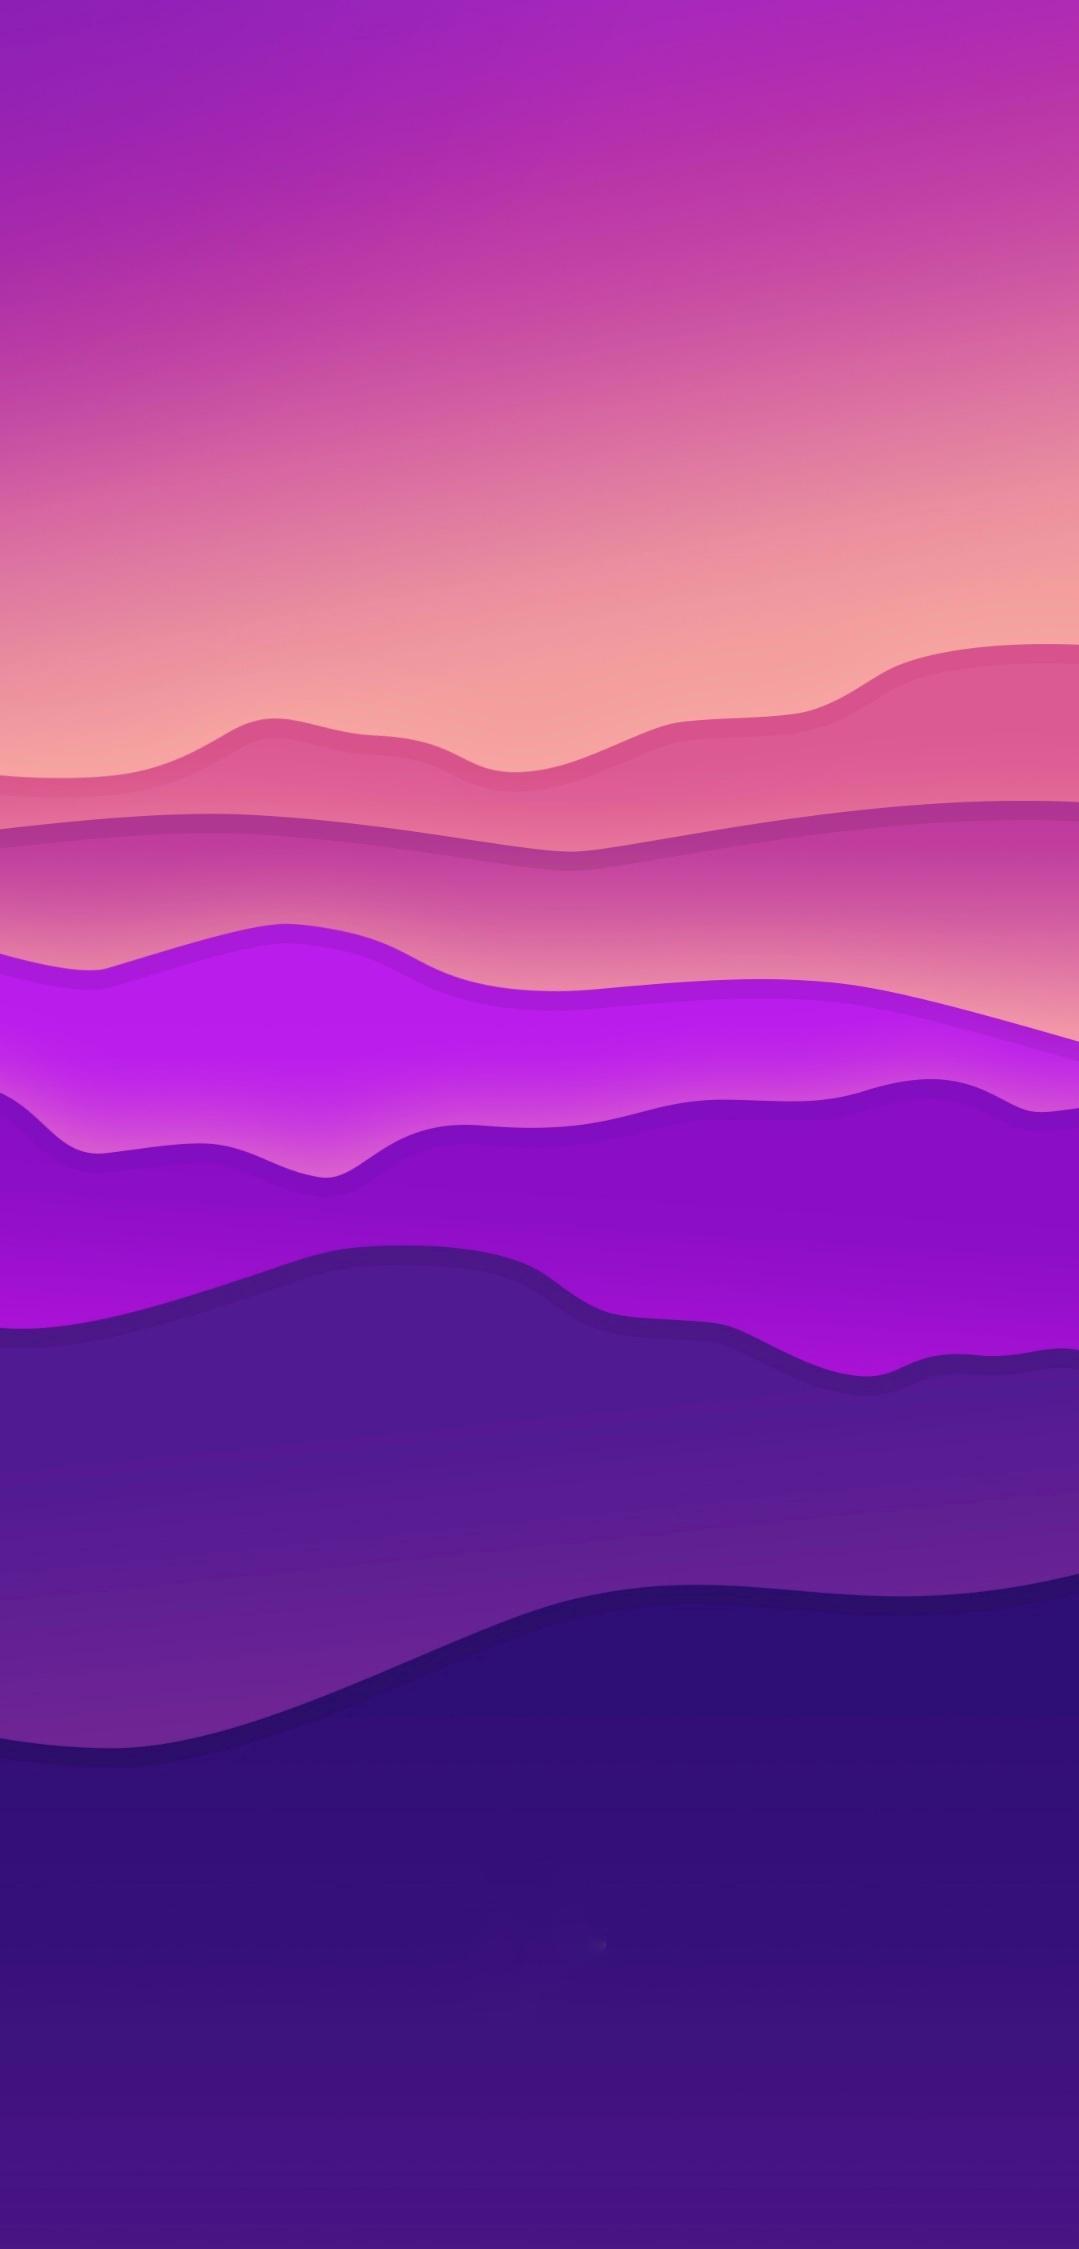 Wallpaper from The iPhone 12 Pro Unboxing video rmkbhd